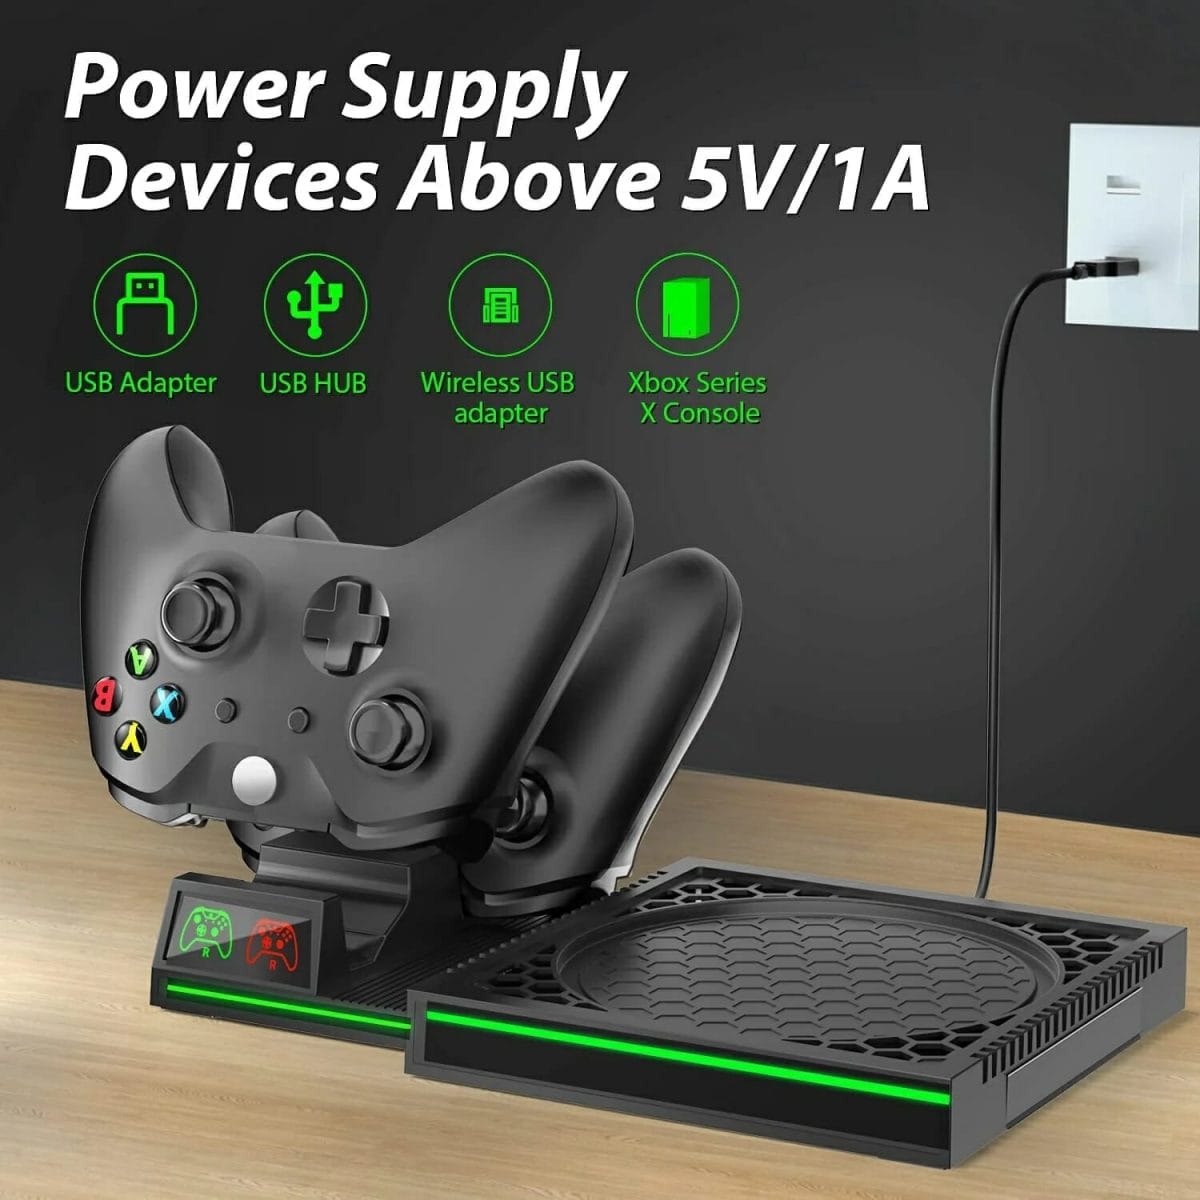 OIVO Cooling and Charging Stand for Xbox Series X